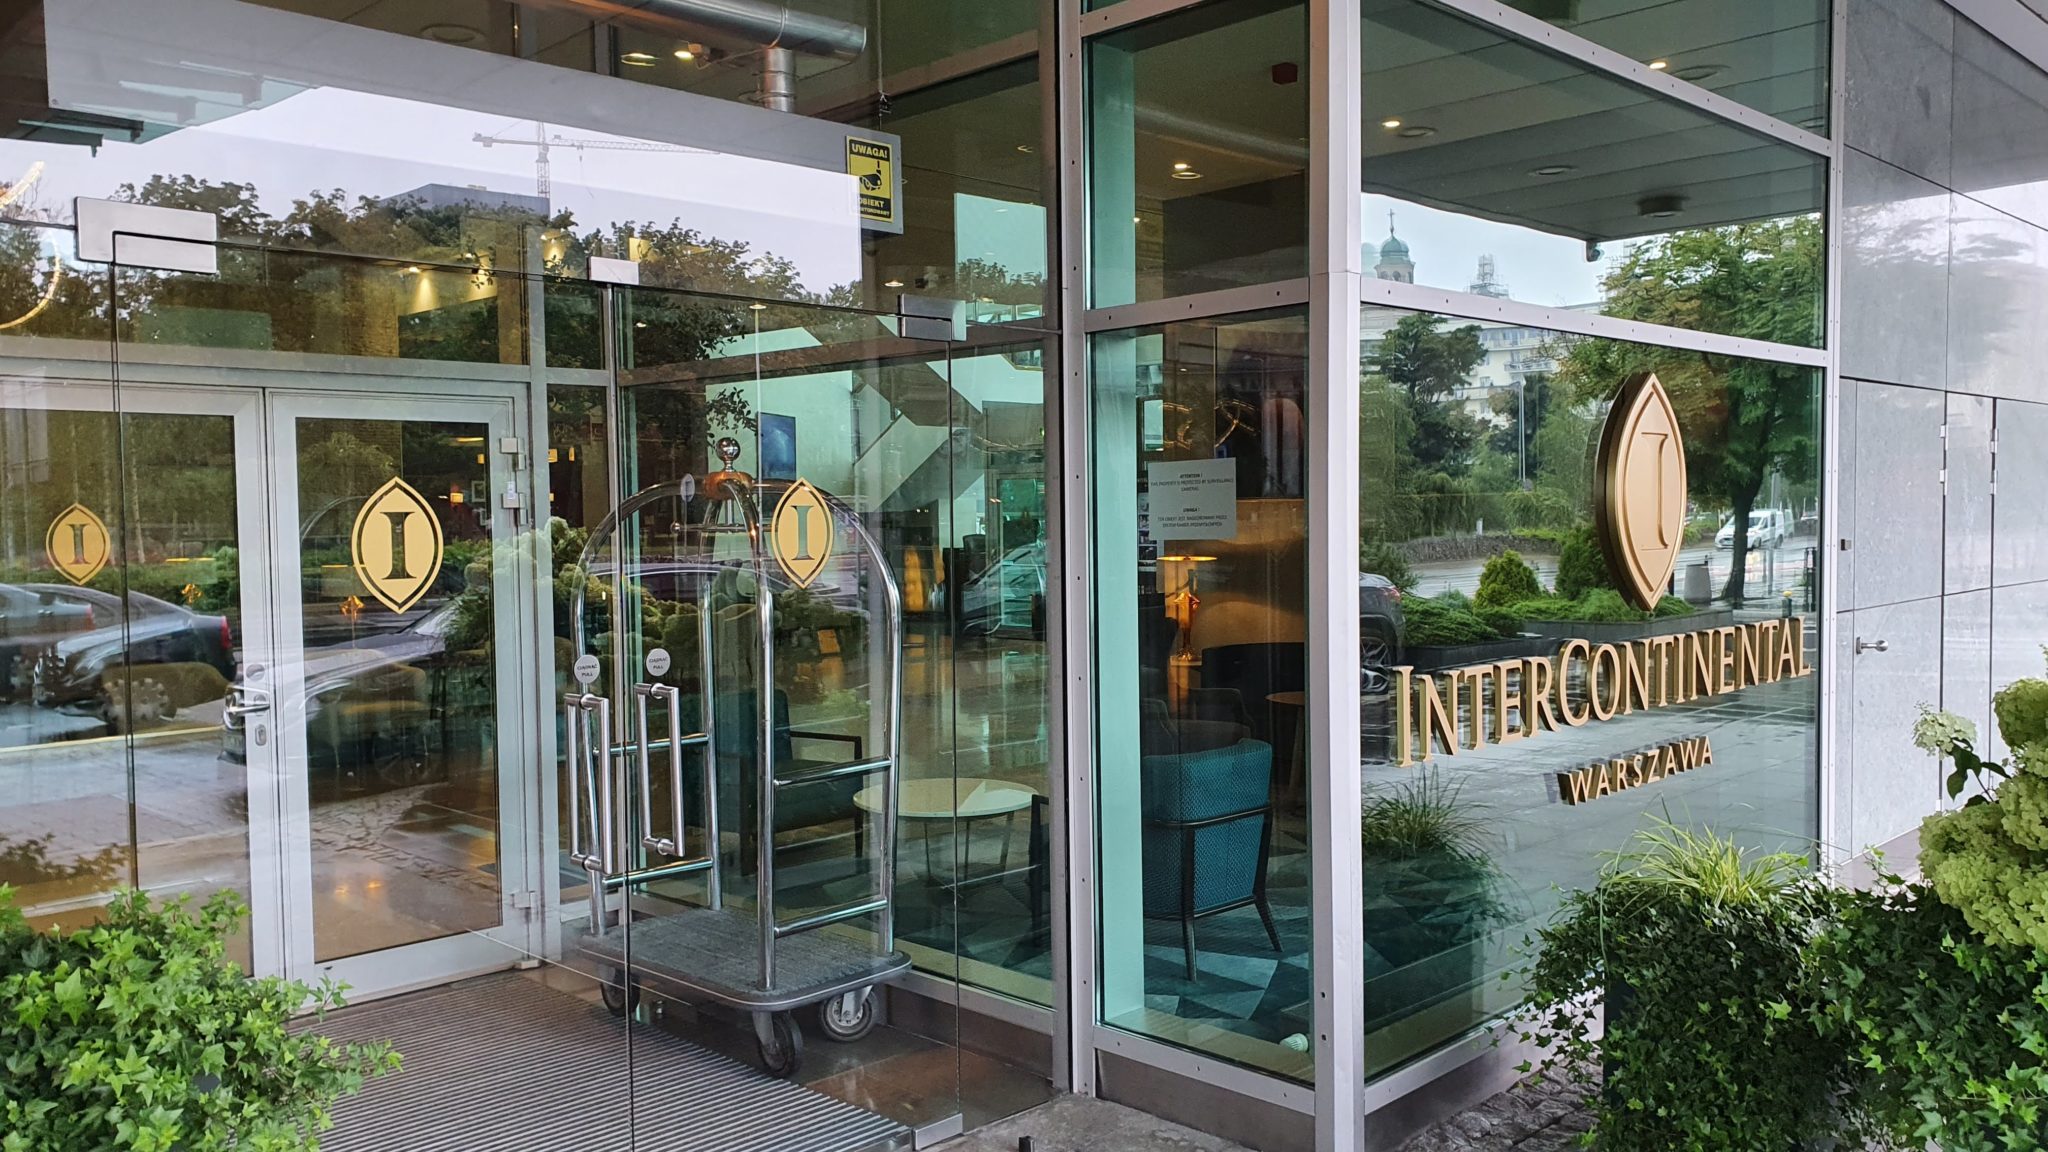 Worldwide & in Europe: The Cheapest InterContinental Hotels this Summer